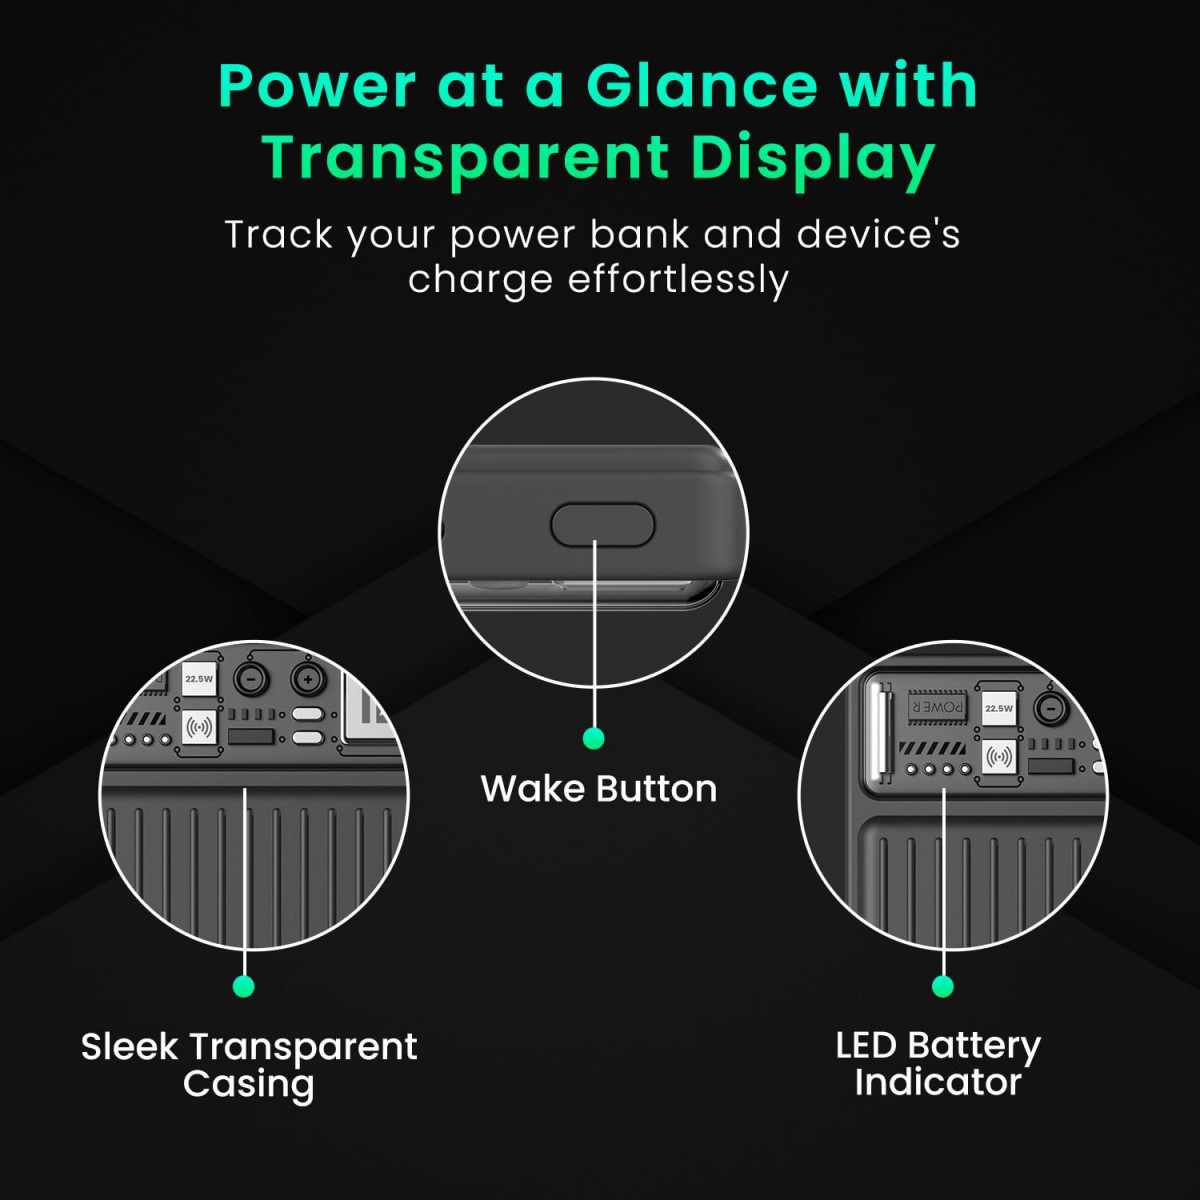 Portronics Luxcell Wireless Mini 10k 10000mAh 15W Magnetic Wireless Fast Charging Smallest Power Bank